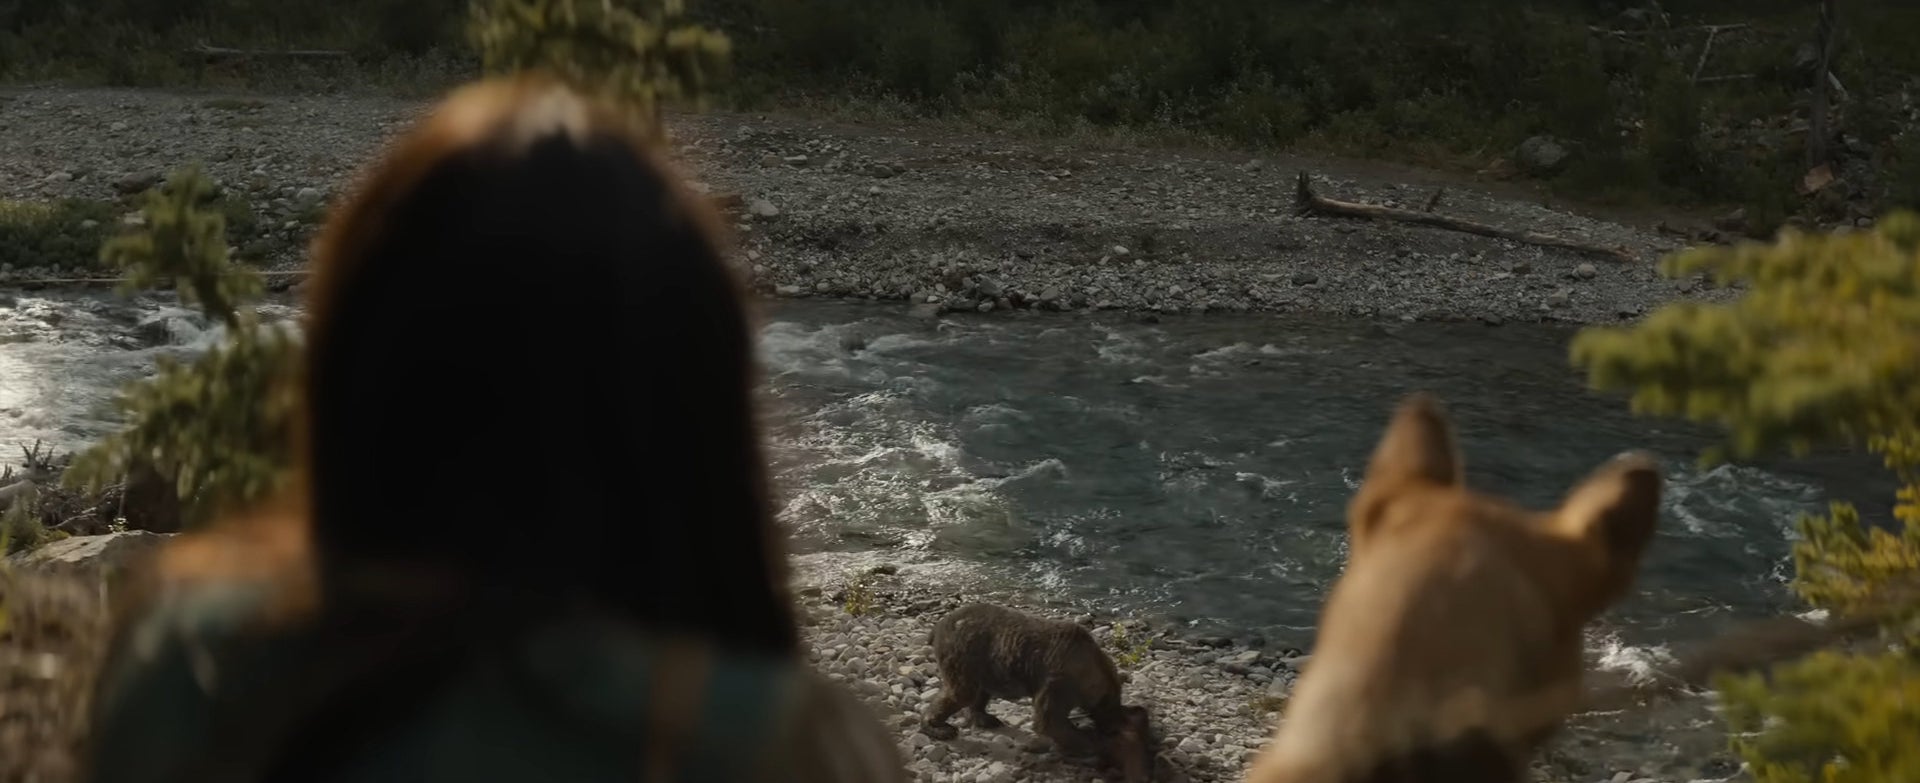 watching a bear by the river in &quot;prey&quot;